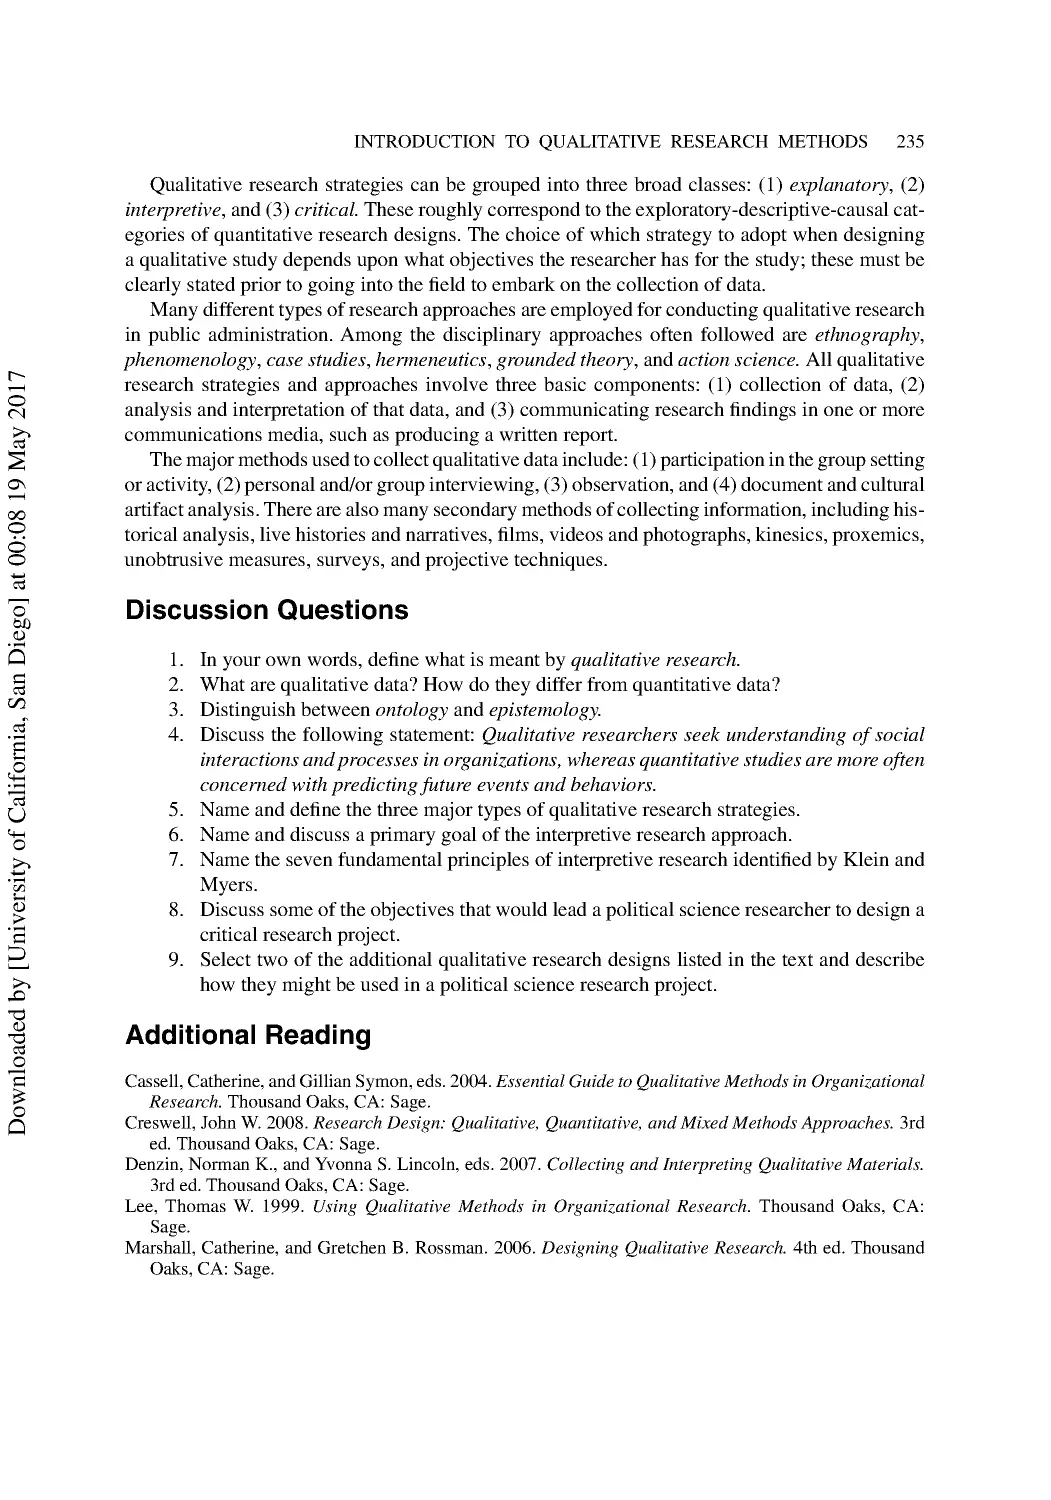 Discussion Questions
Additional Reading